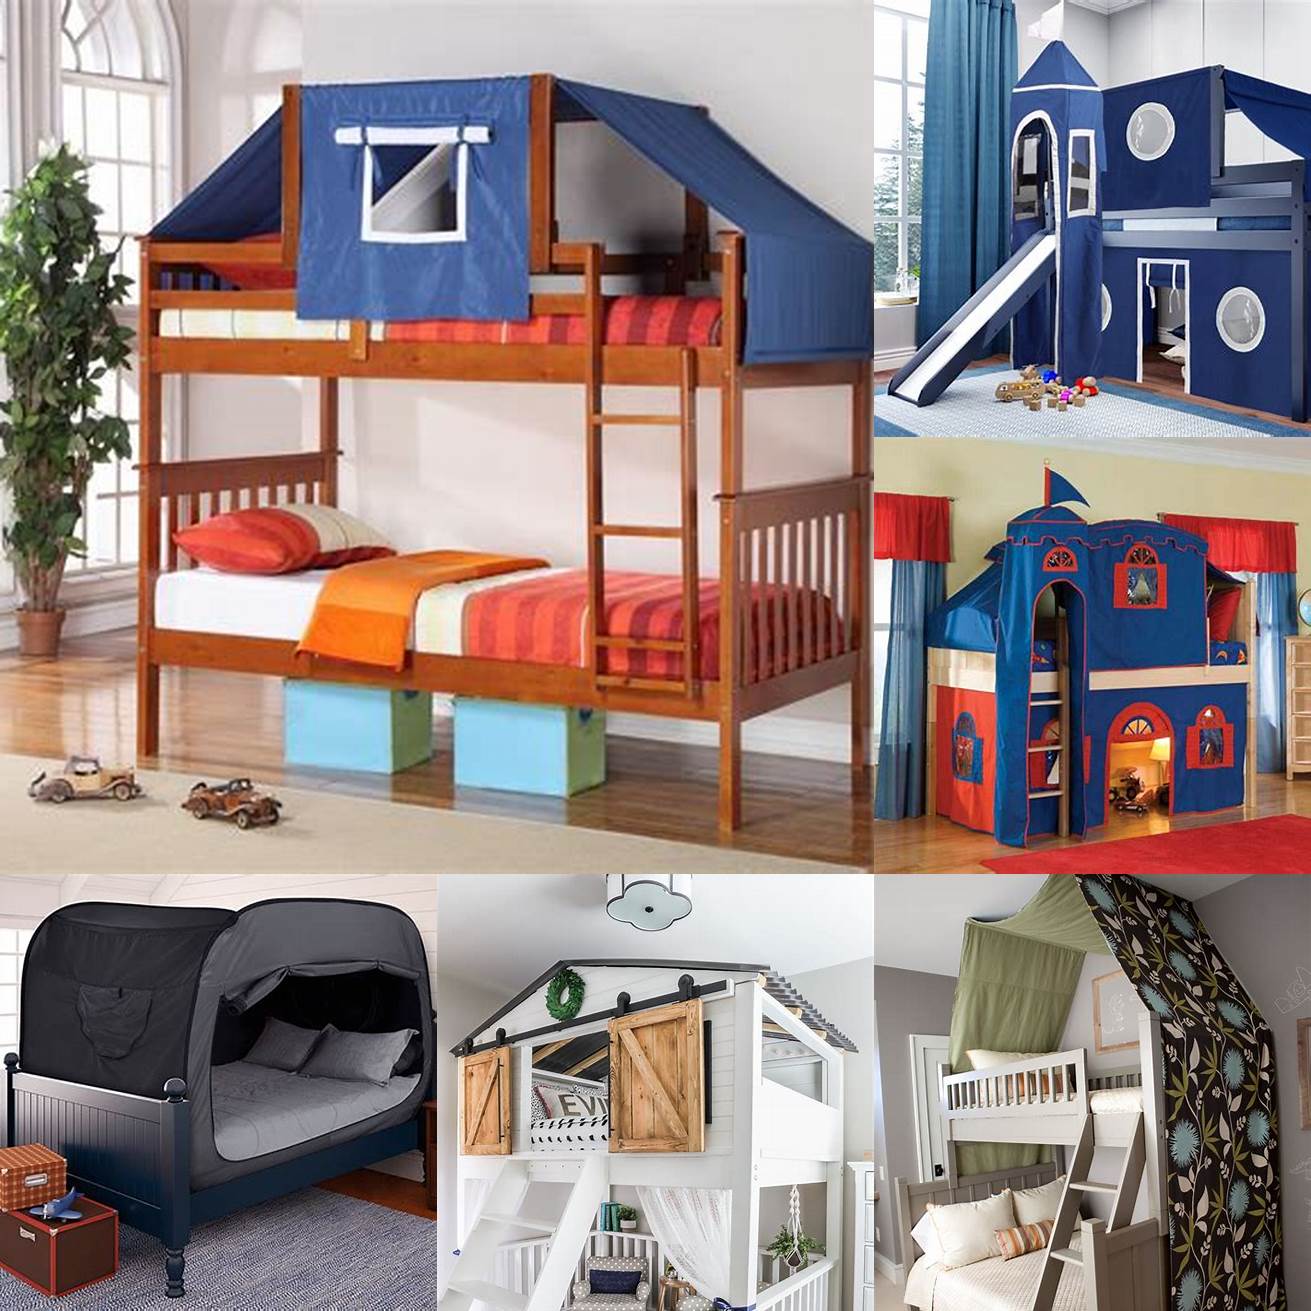 Themed boys bunk bed with built-in tent